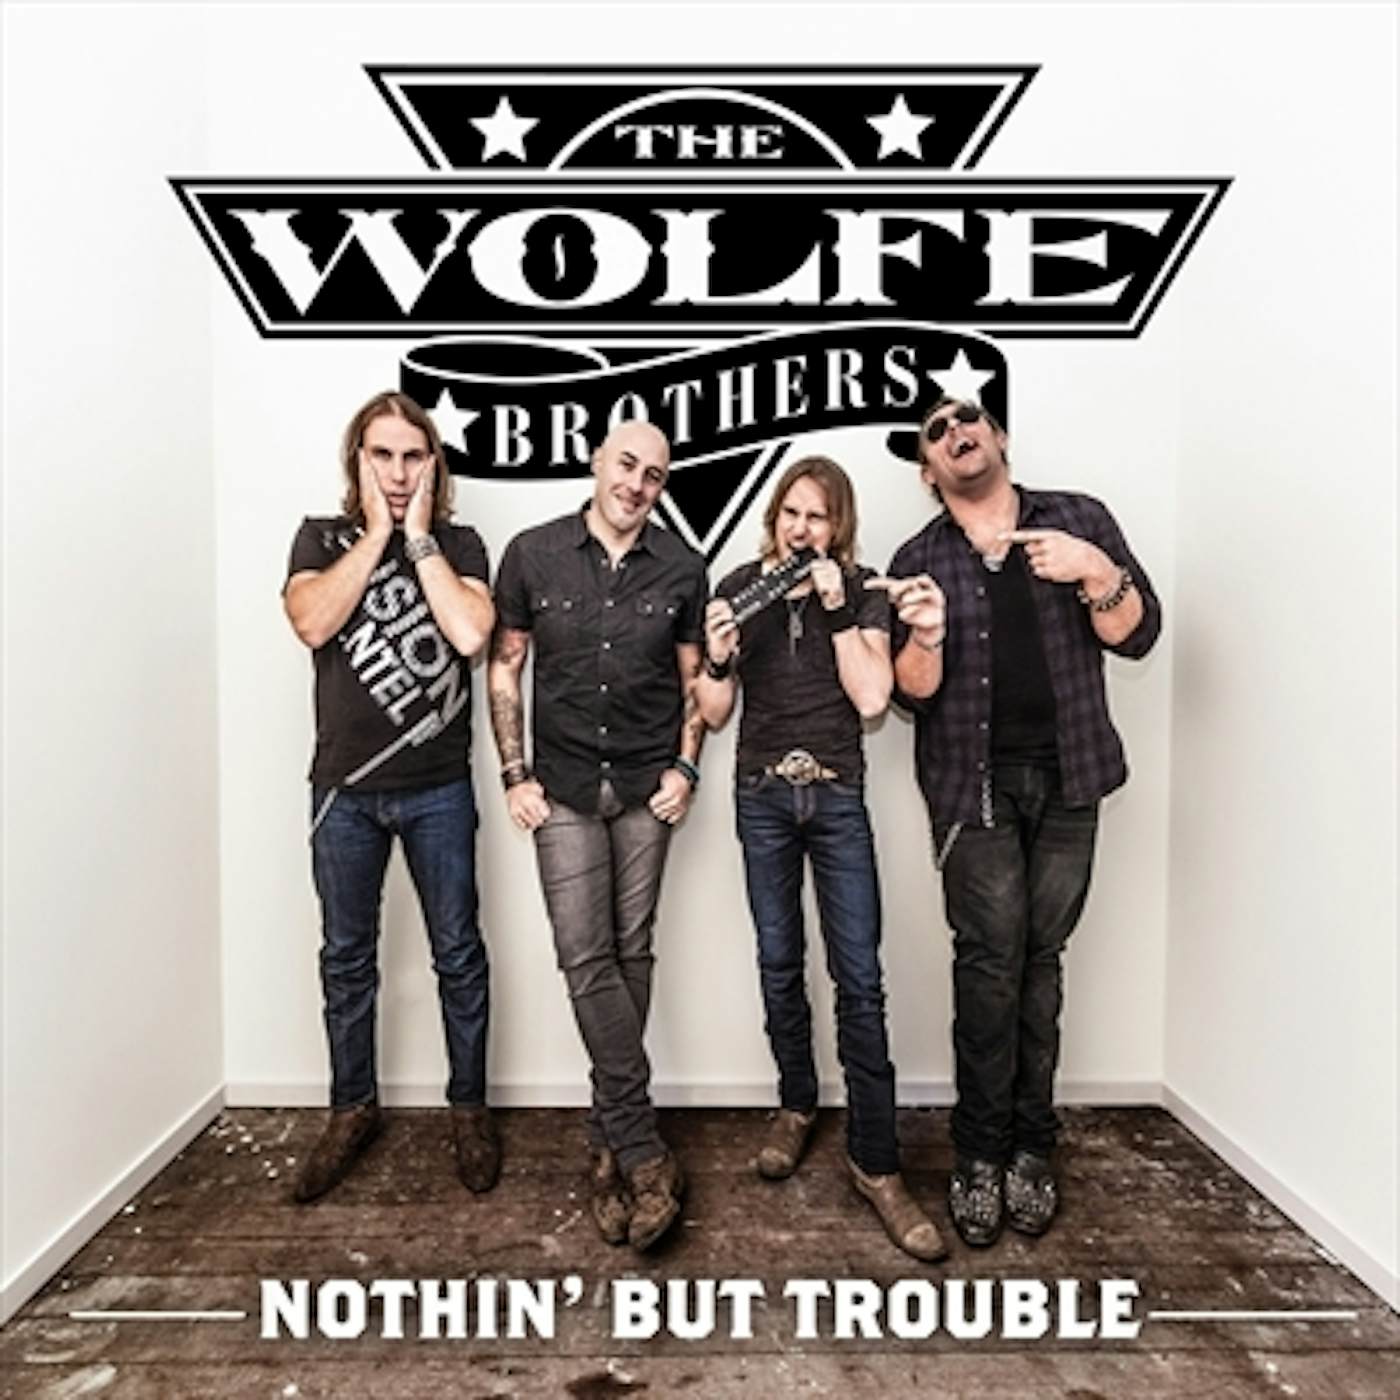 The Wolfe Brothers - Nothin' But Trouble CD